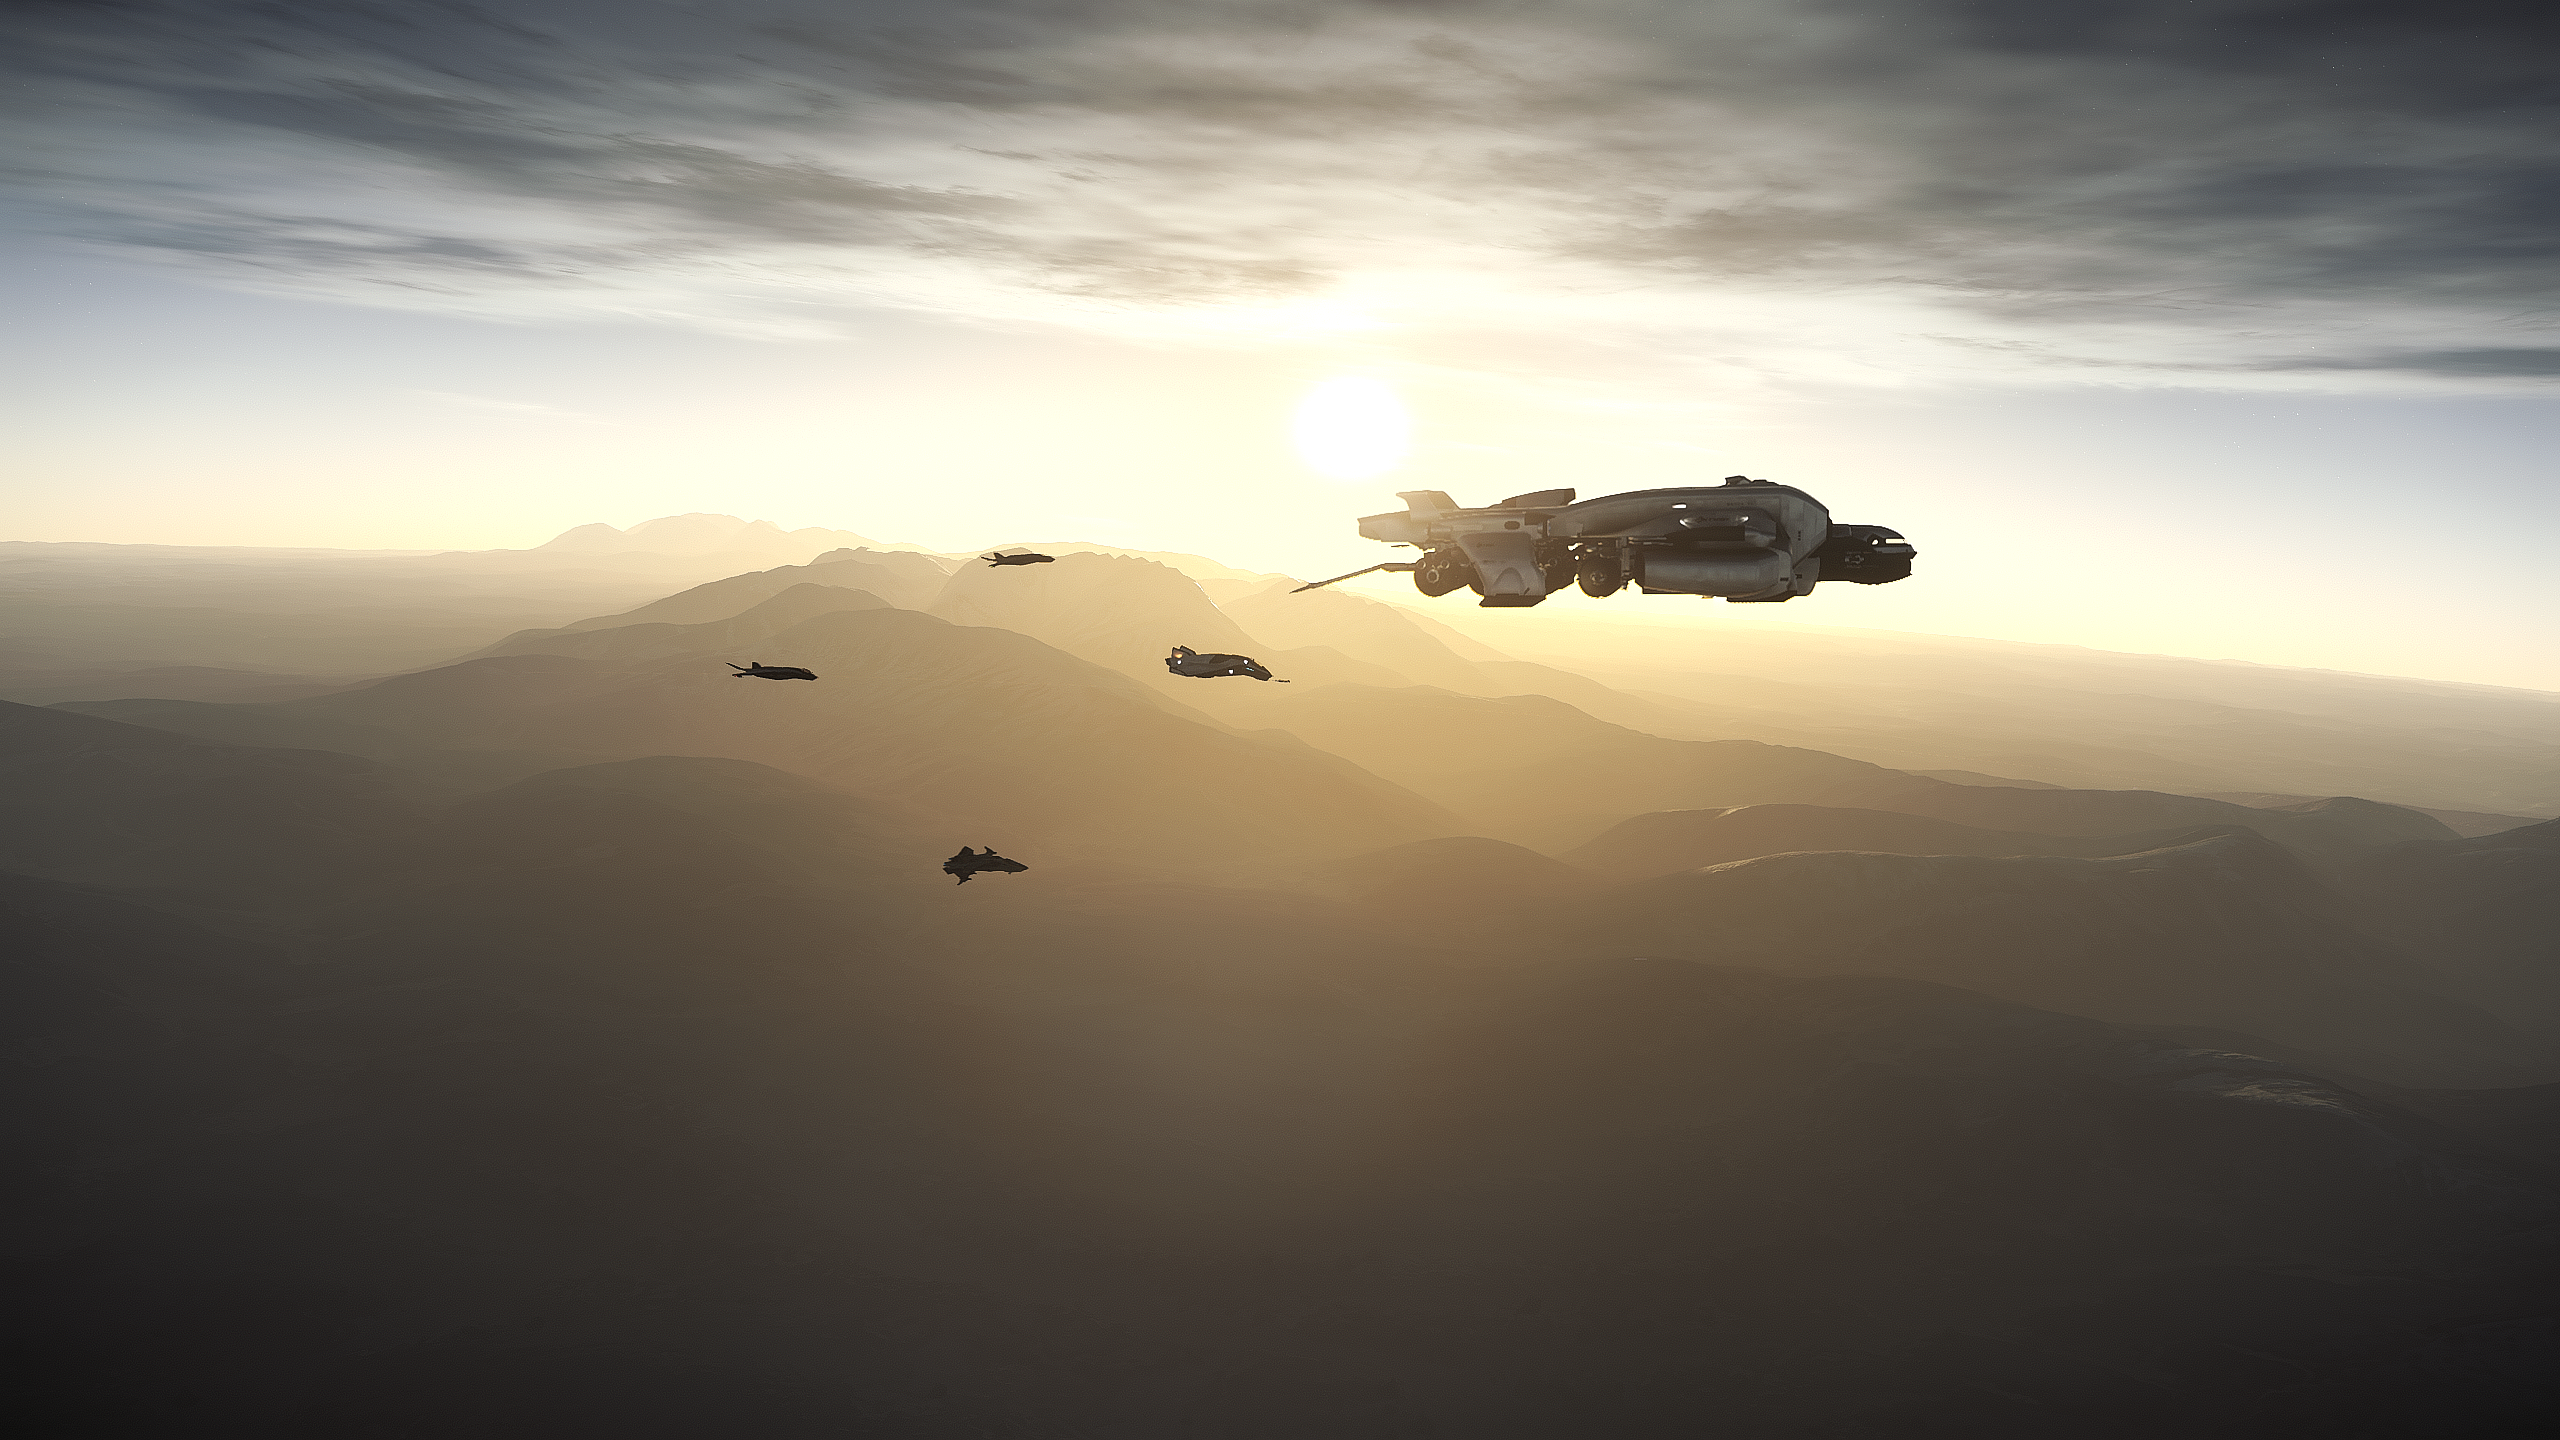 Star Citizen is free to download and play for the next week